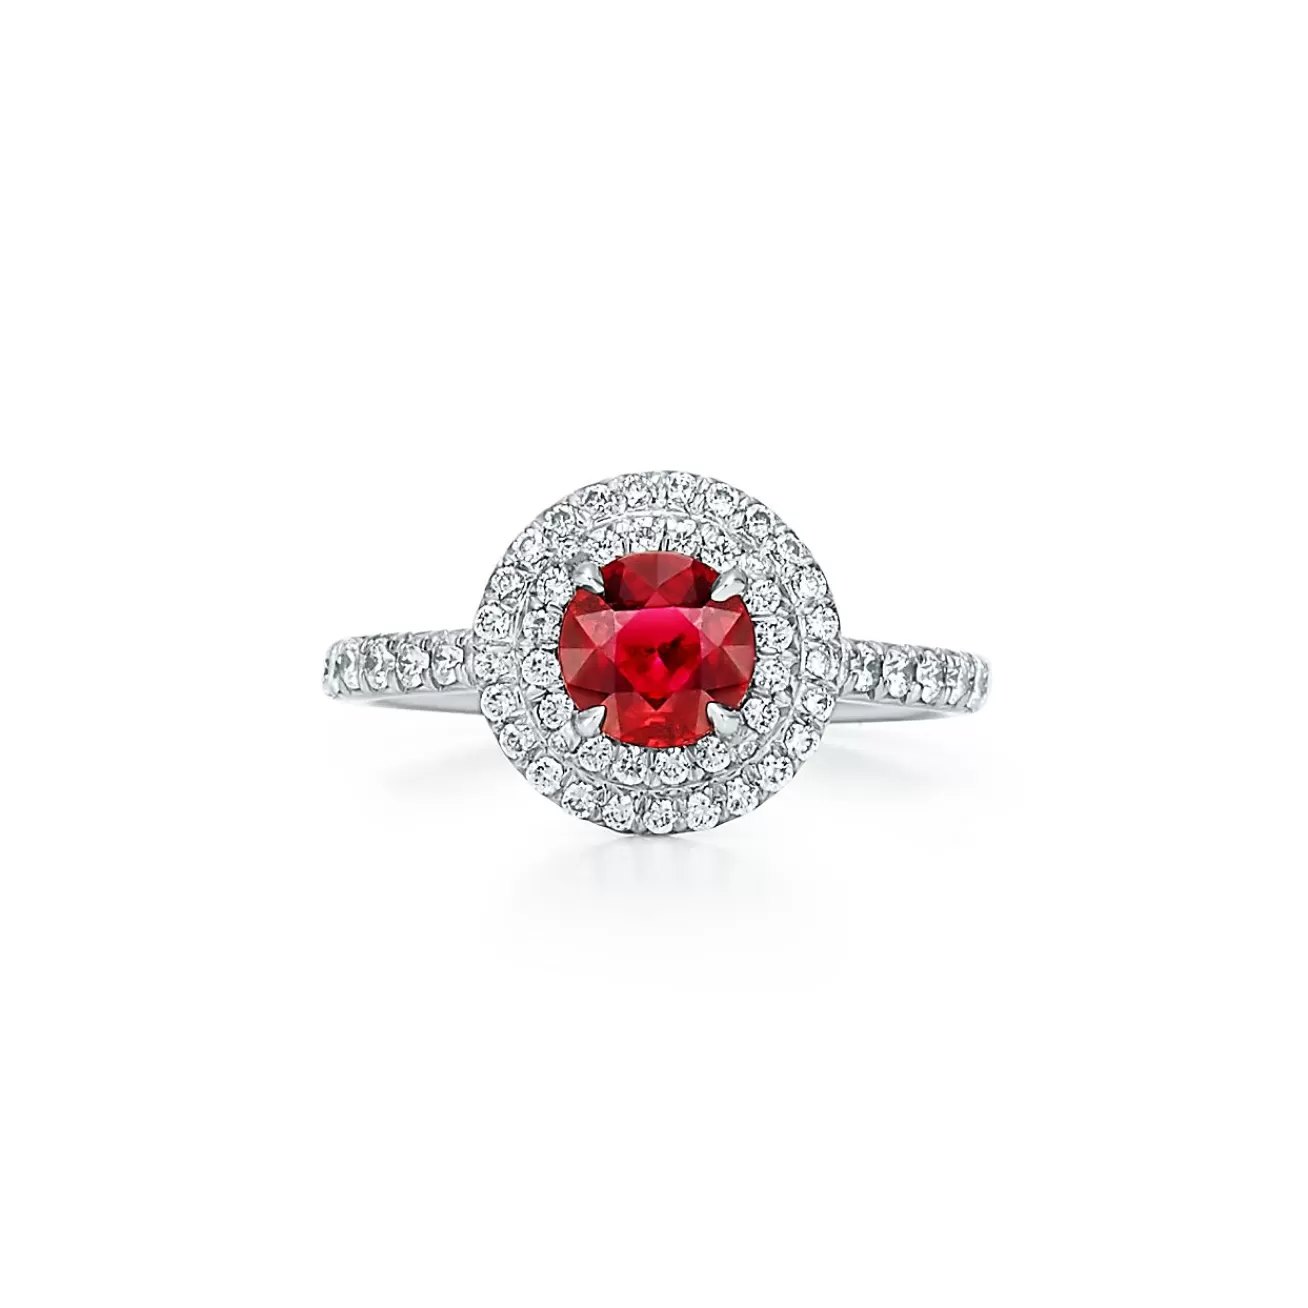 Tiffany & Co. Tiffany Soleste® ring in platinum with a ruby and diamonds. | ^ Rings | Platinum Jewelry